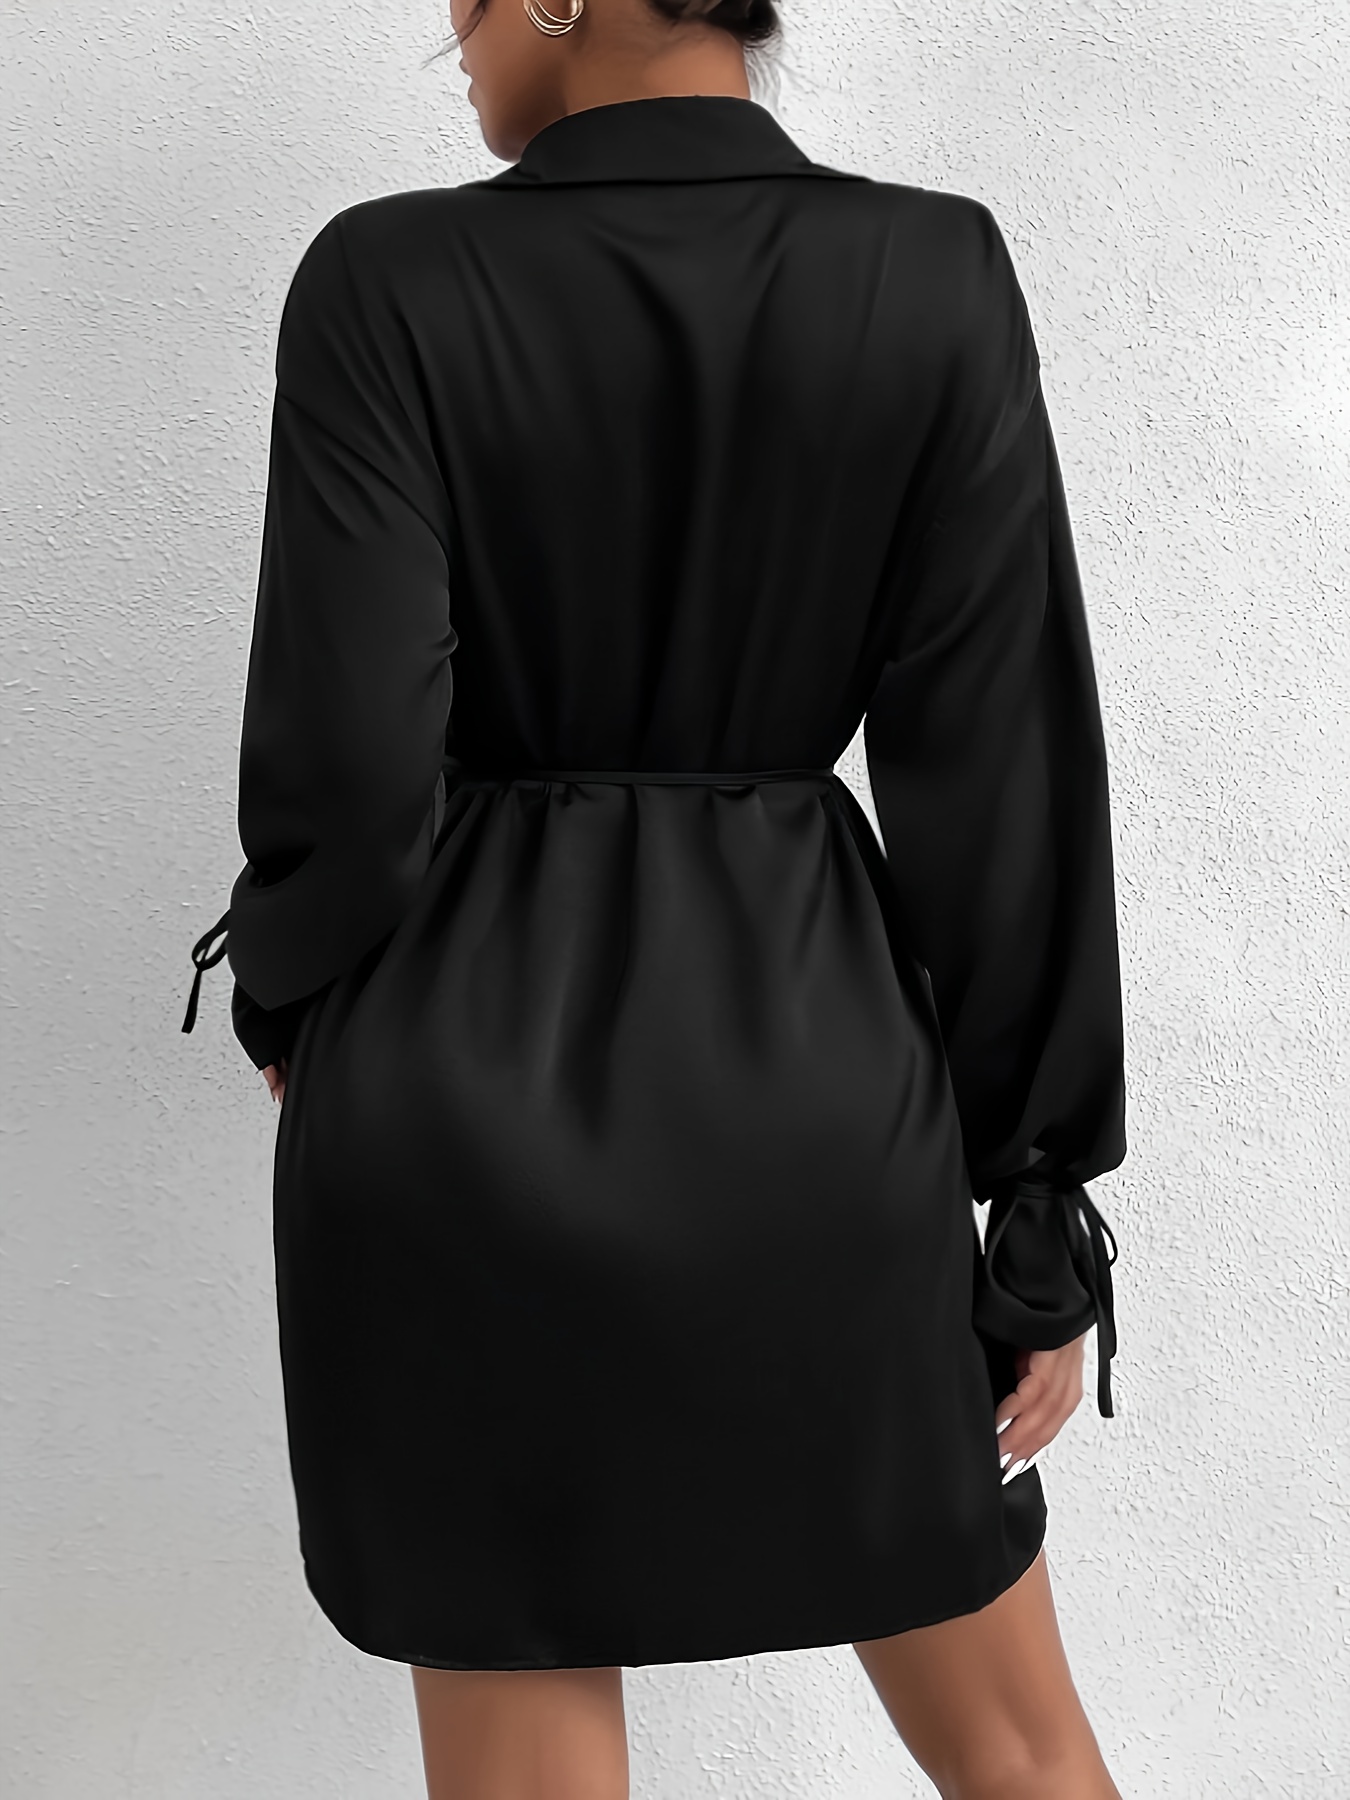 solid button front belted dress elegant long sleeve lapel collar dress womens clothing